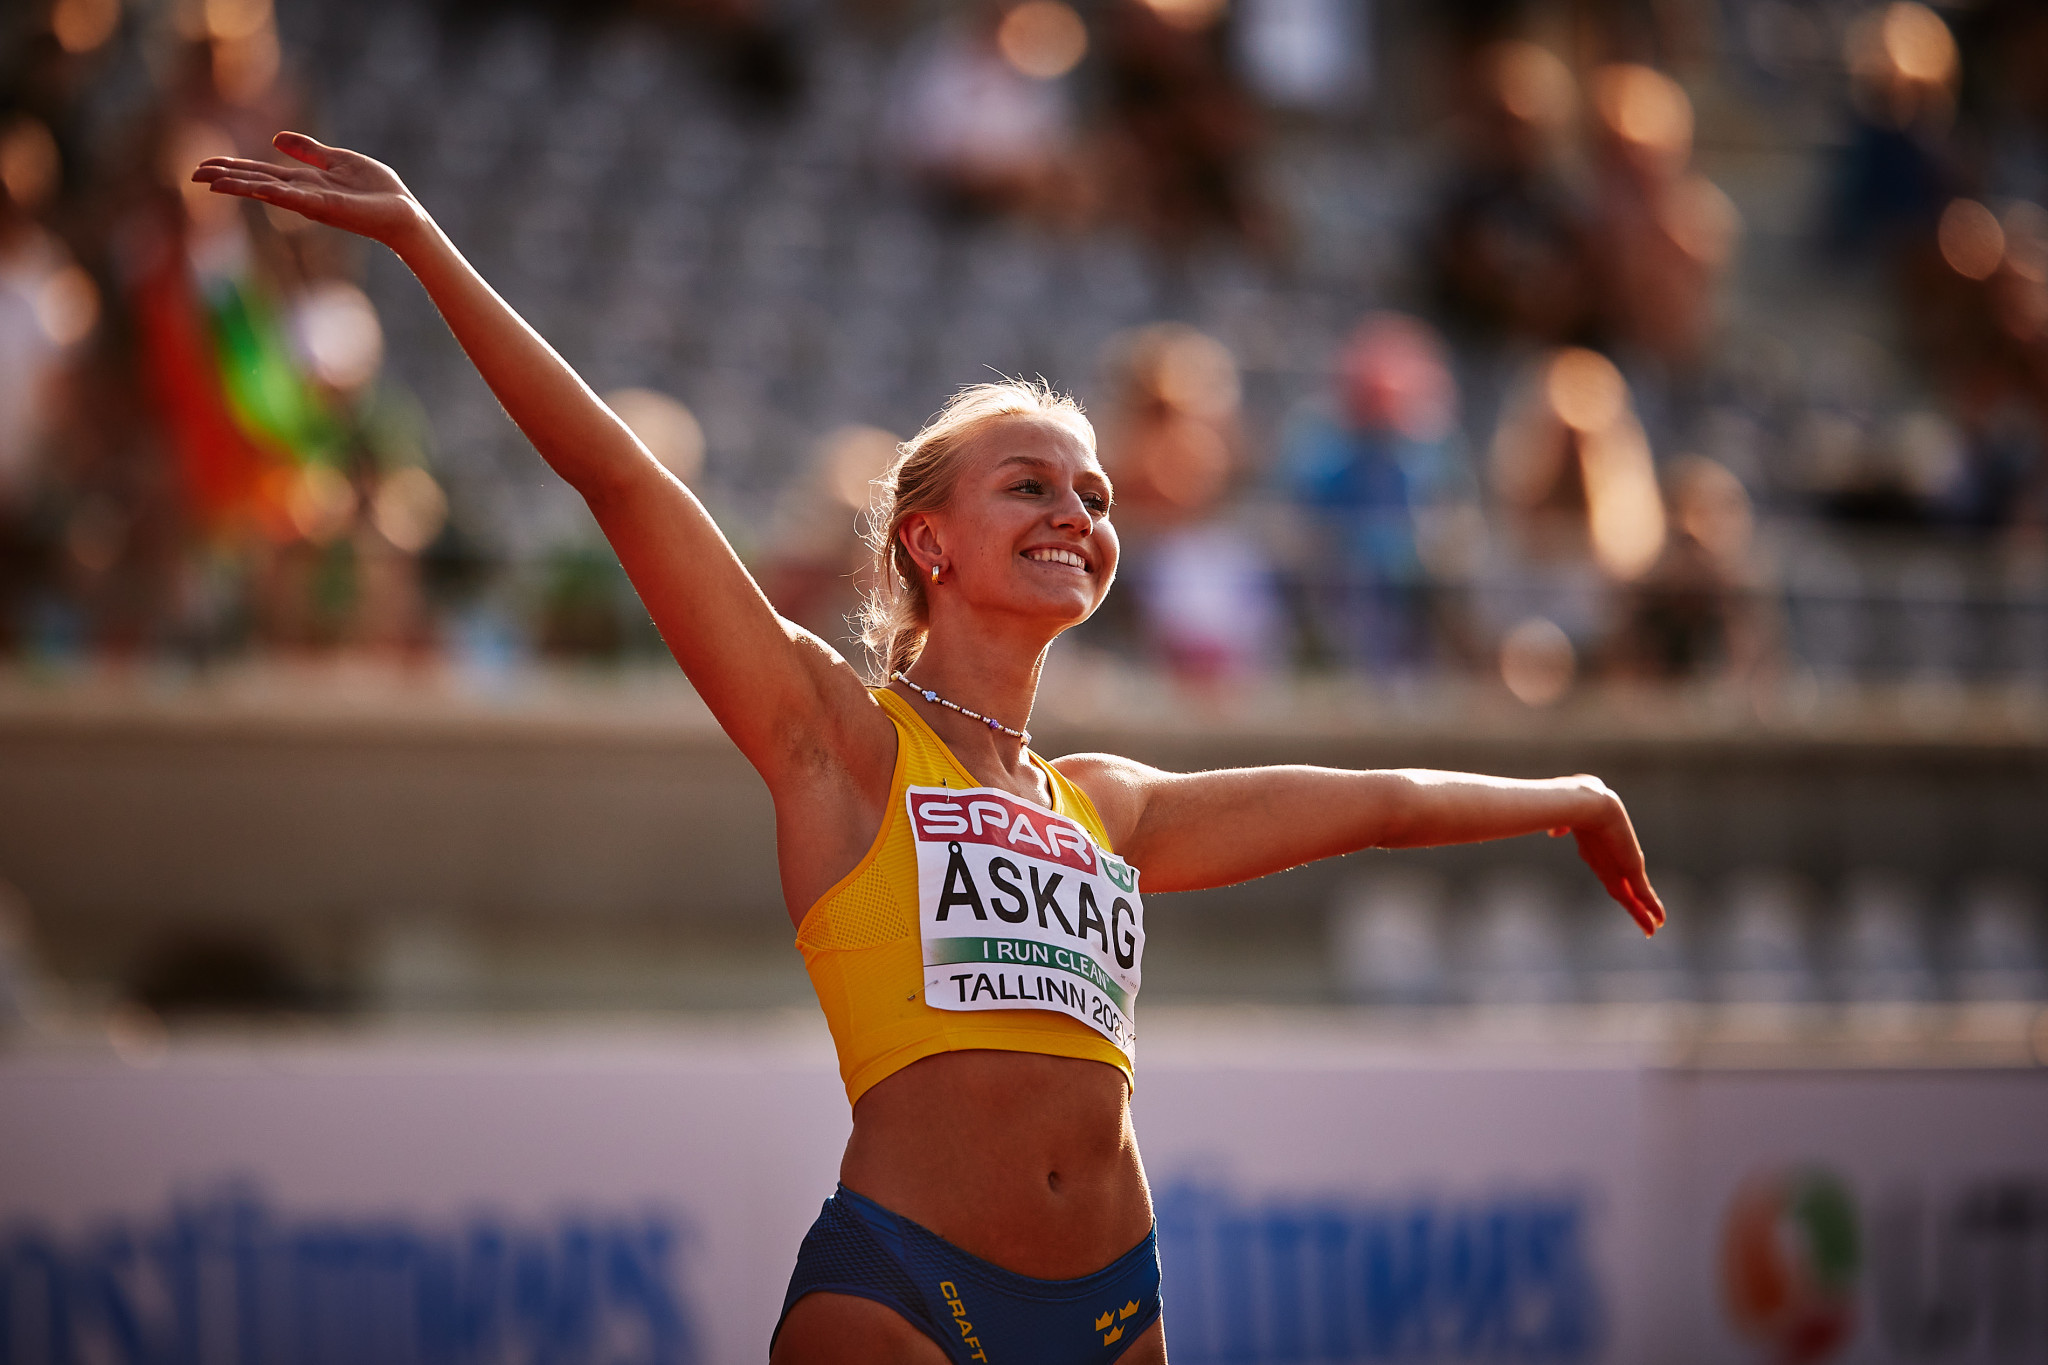 Swedish Olympic Committee adds 16 more athletes to talent support programme